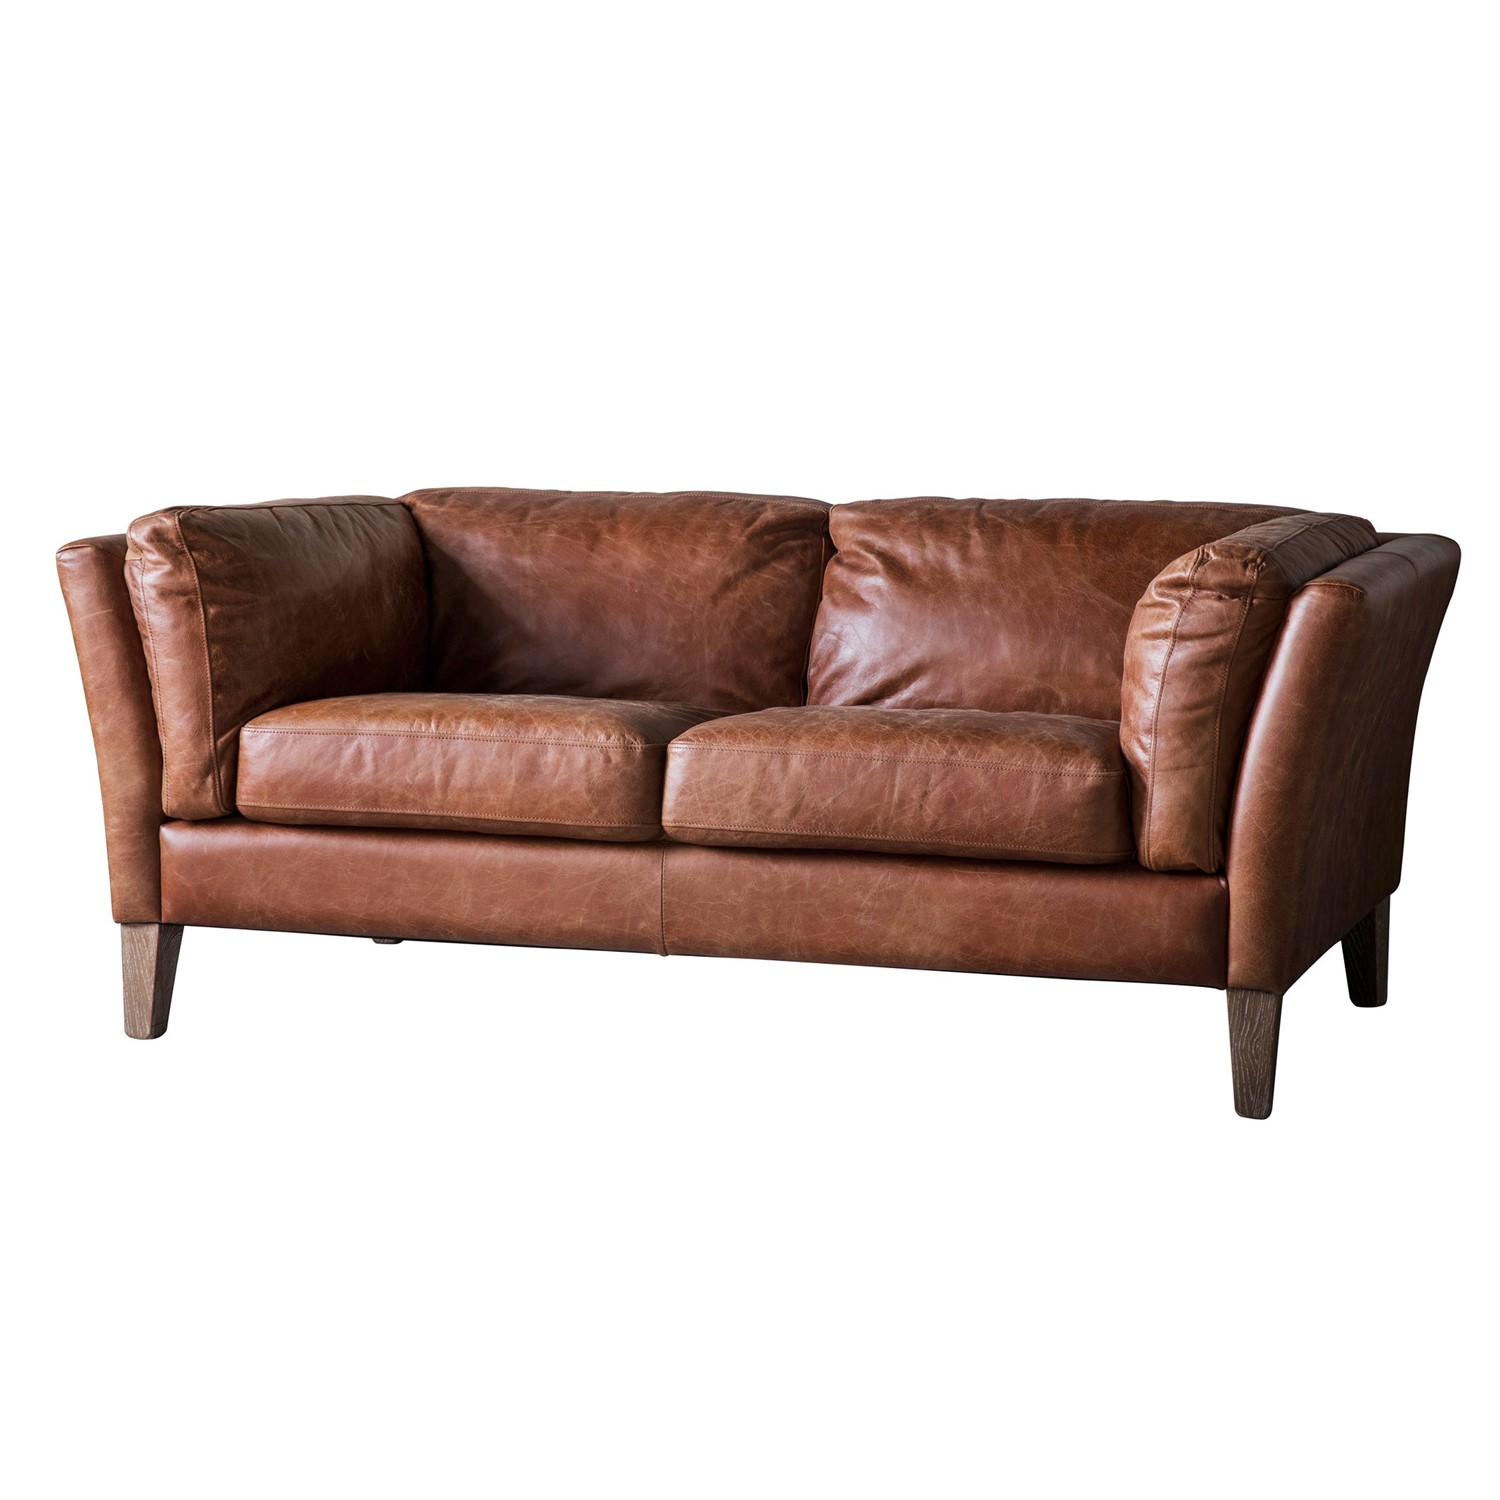 Read more about Brown vintage leather 2 seater sofa caspian house